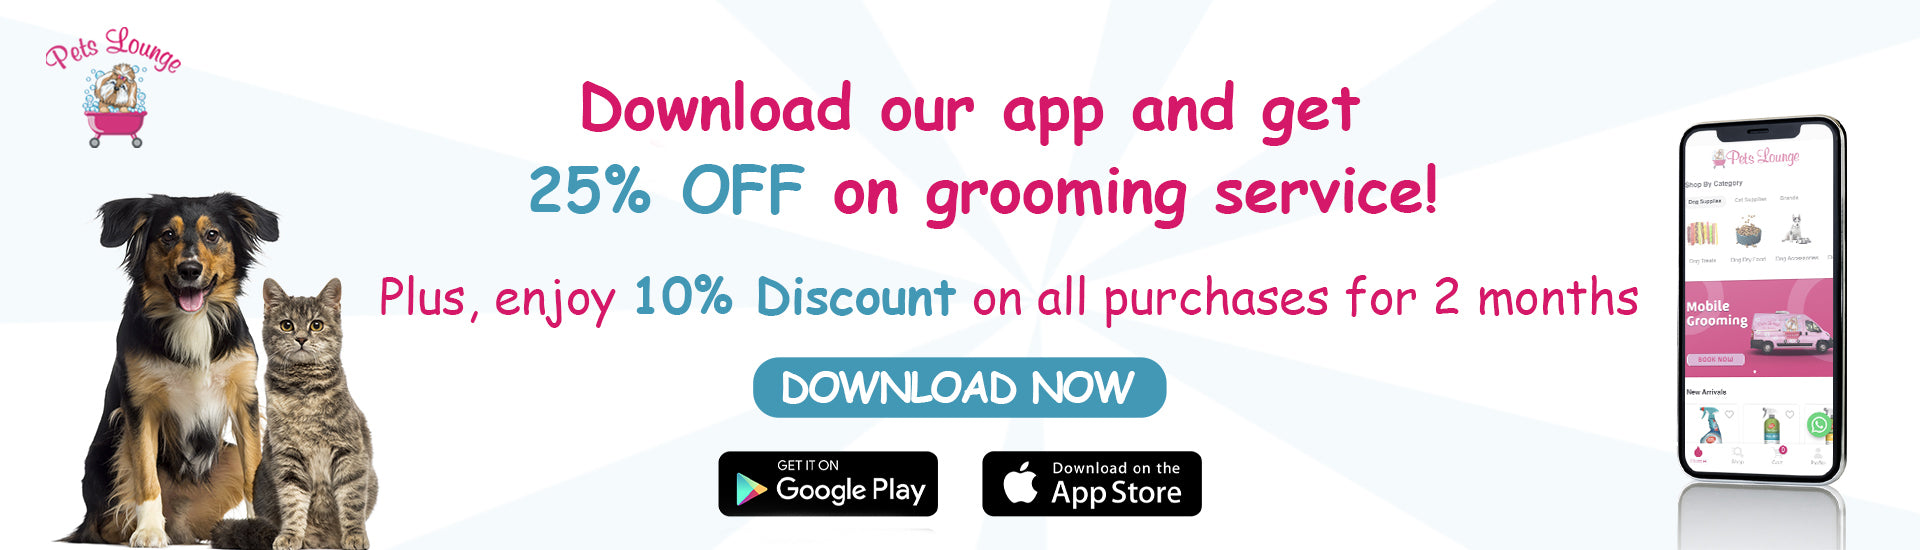 Download our app and get 25% OFF on pet grooming service